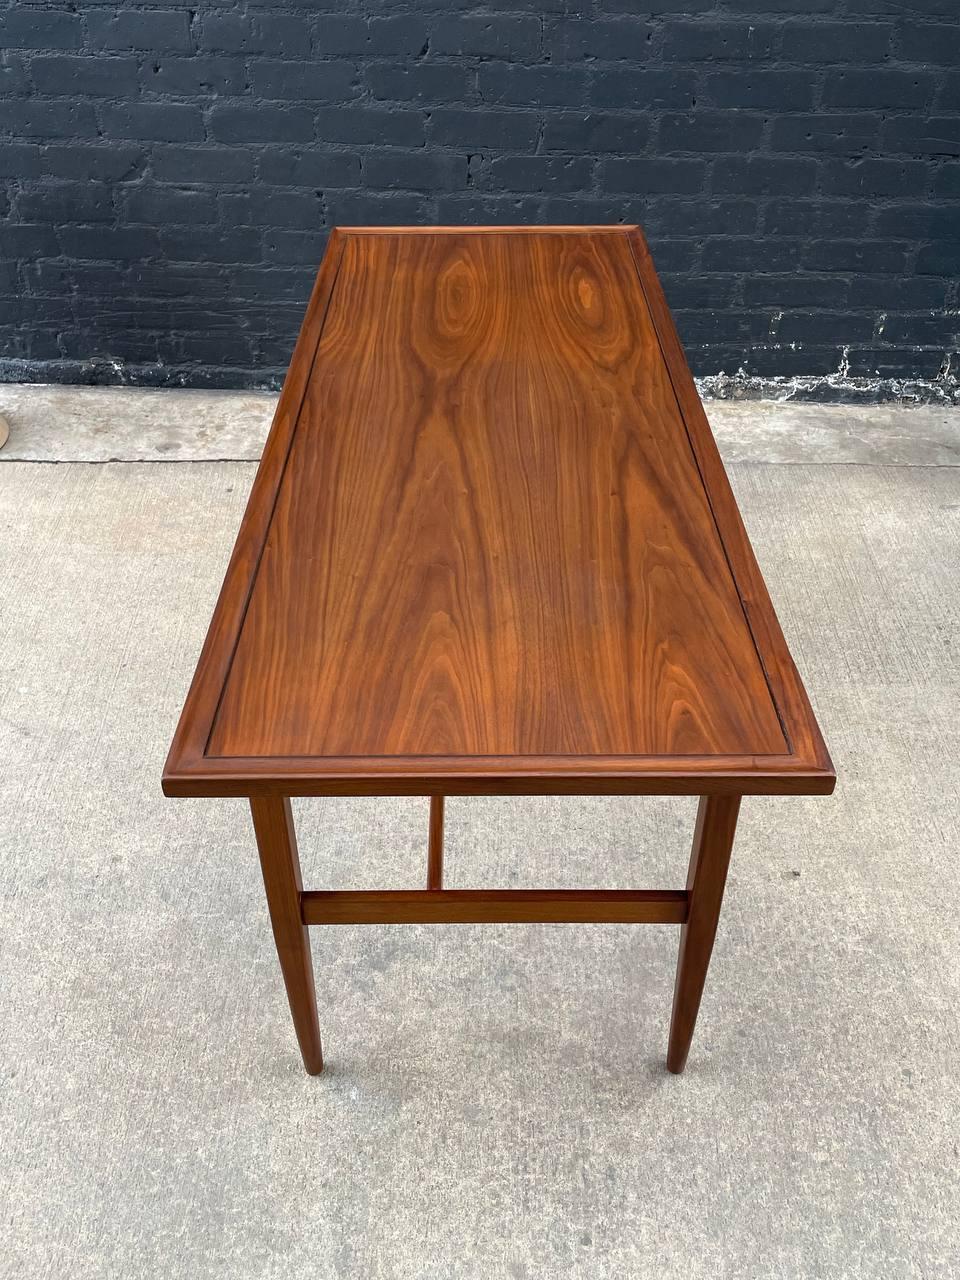 Mid-20th Century Newly Refinished - Mid-Century Modern Sculpted Walnut Desk